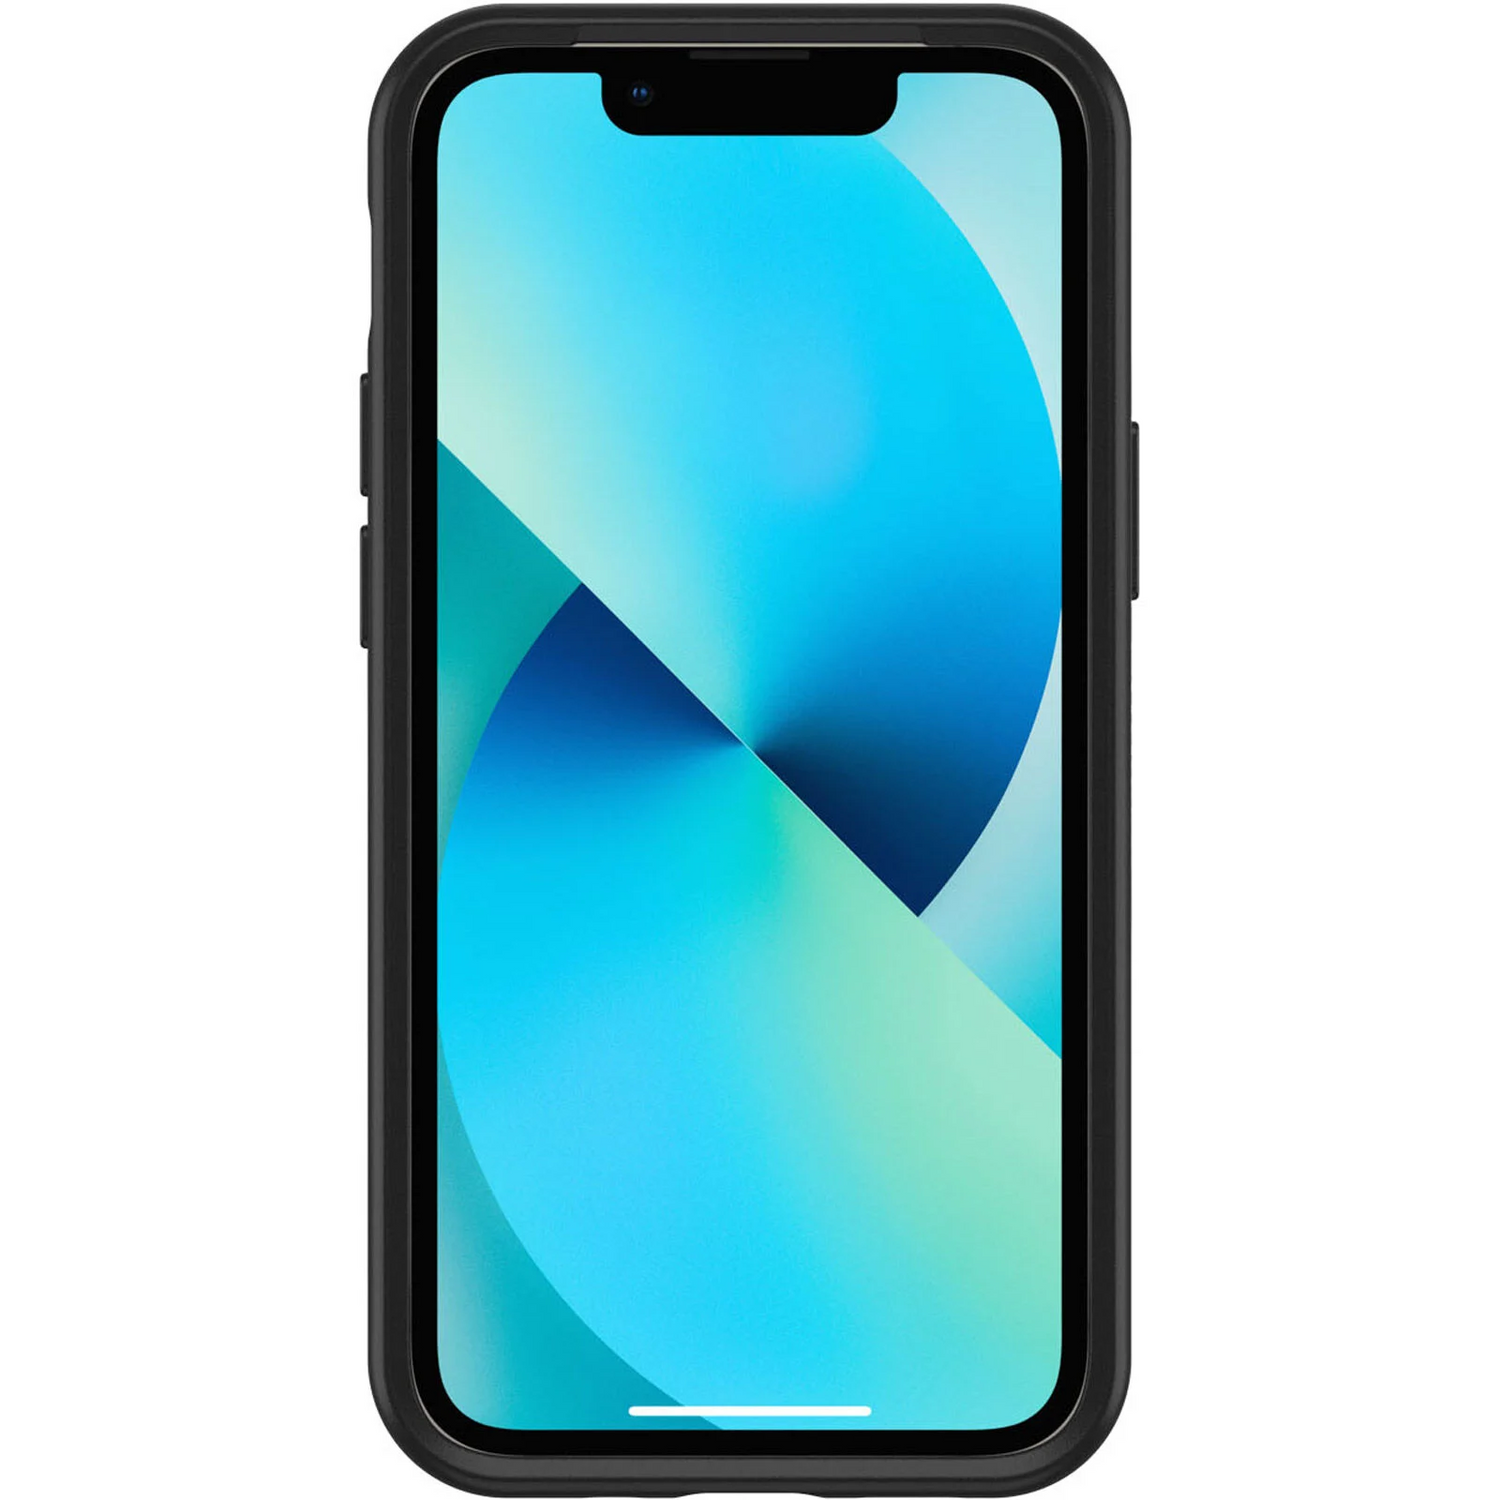 OtterBox SYMMETRY SERIES+ Case for Apple iPhone 13 mini /iPhone 12 mini - Black (Certified Refurbished)